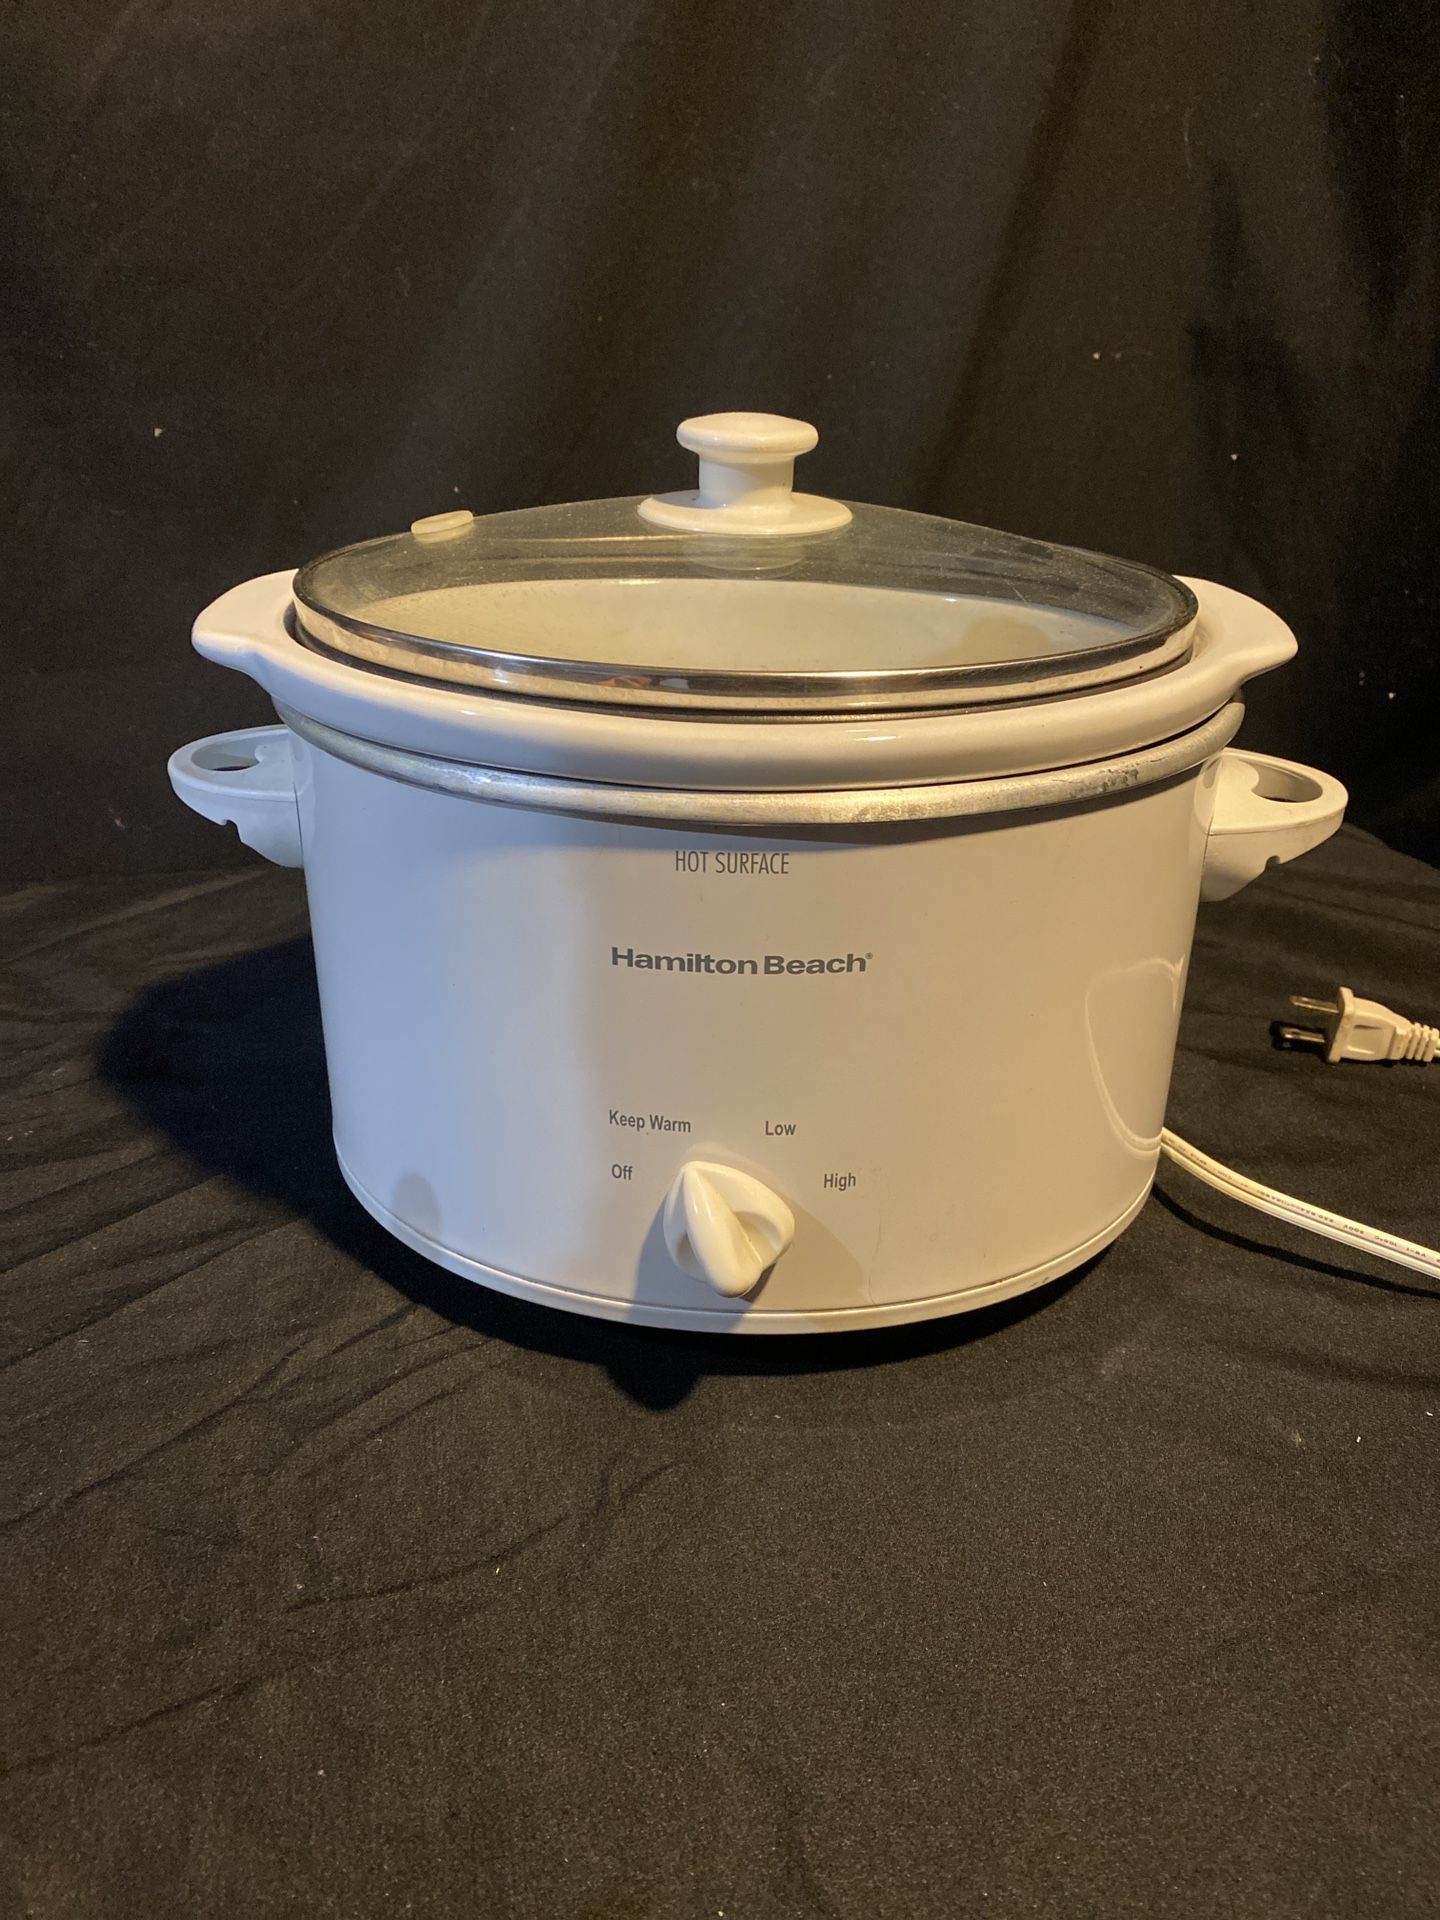 Slow cooker by hamilton beach